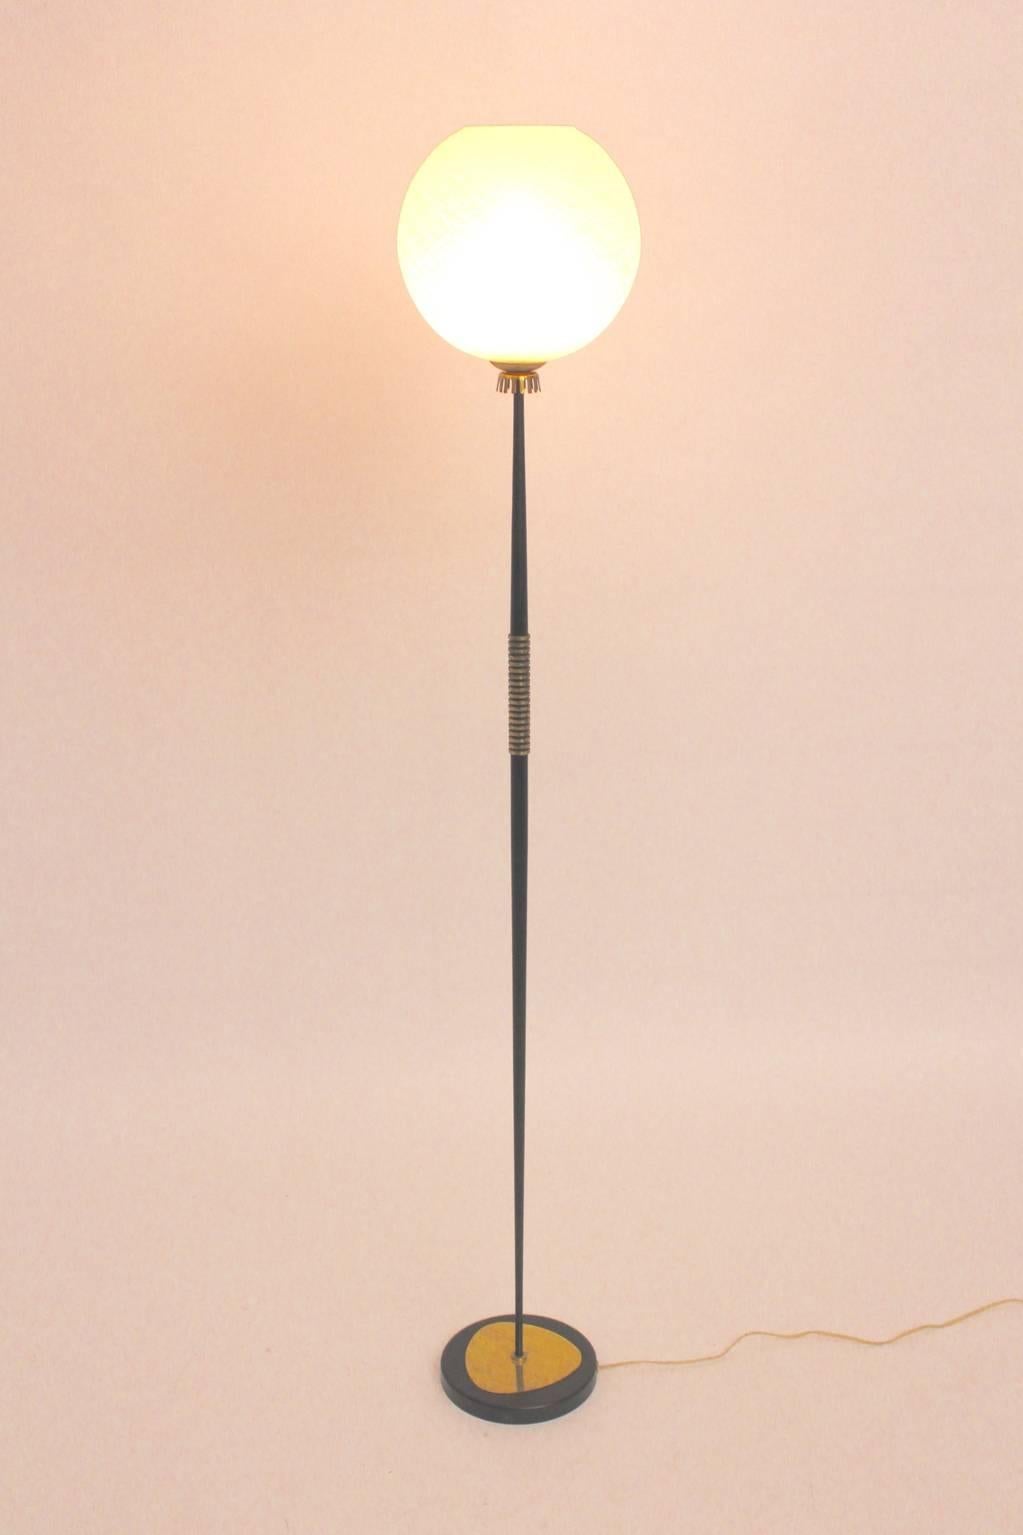 Mid century modern vintage floor lamp, which was designed and manufactured in Vienna, 1950s.
The conical stem was made of cast iron and metal - black lacquered with nice brass details.
The globe glass shade was made of textured glass.
The floor lamp